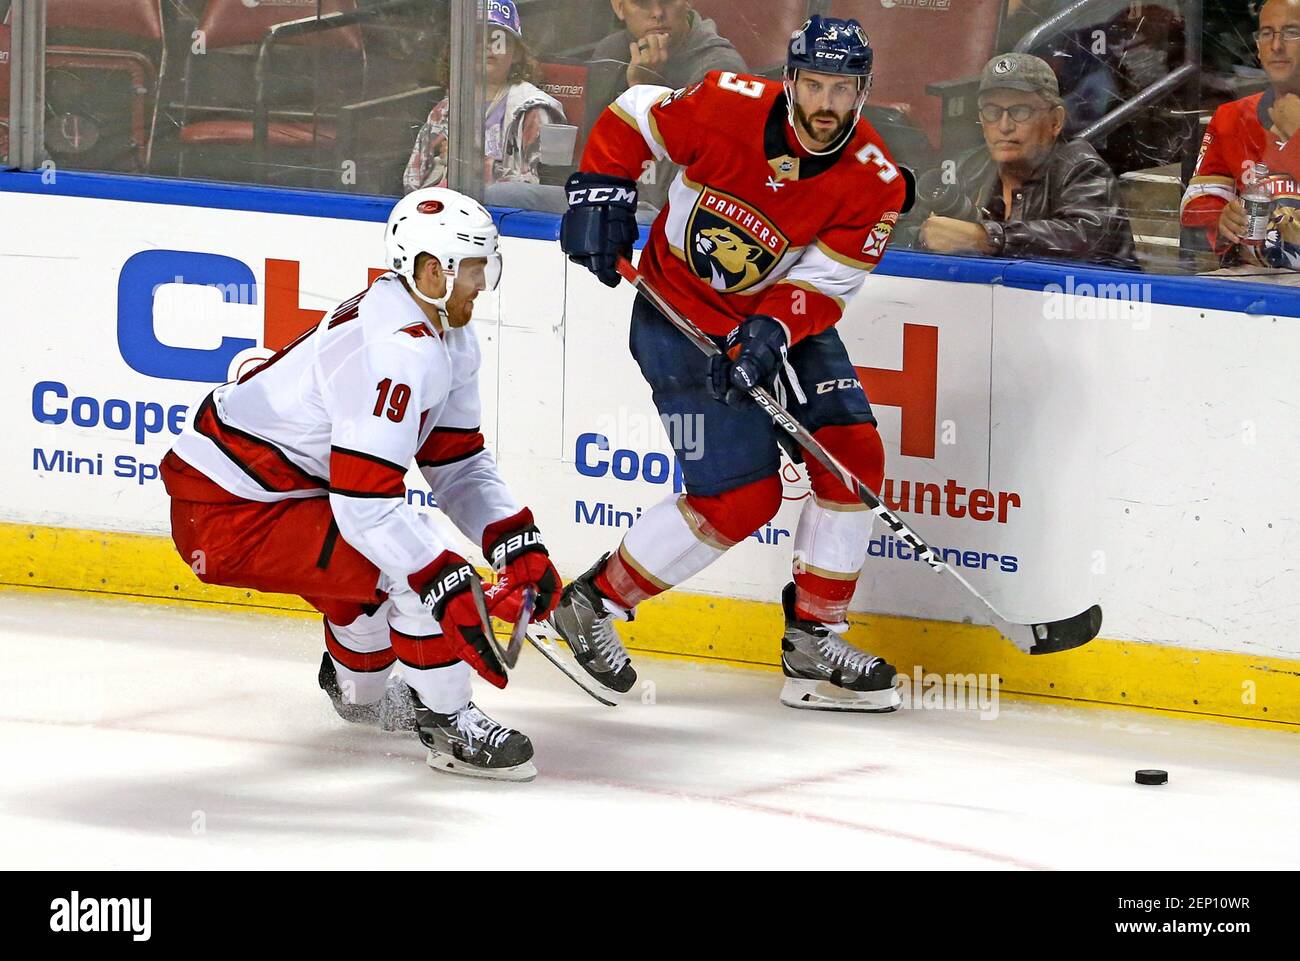 Florida Panthers defenseman Keith Yandle (3) skates for the puck against Carolina Hurricanes defensemen Dougie Hamilton (19) during the third period of an NHL hockey game at the BB&T Center Tuesday, Oct. 8, 2019 in Sunrise, Fla. (Photo by David Santiago/Miami Herald/TNS/Sipa USA) Stock Photo